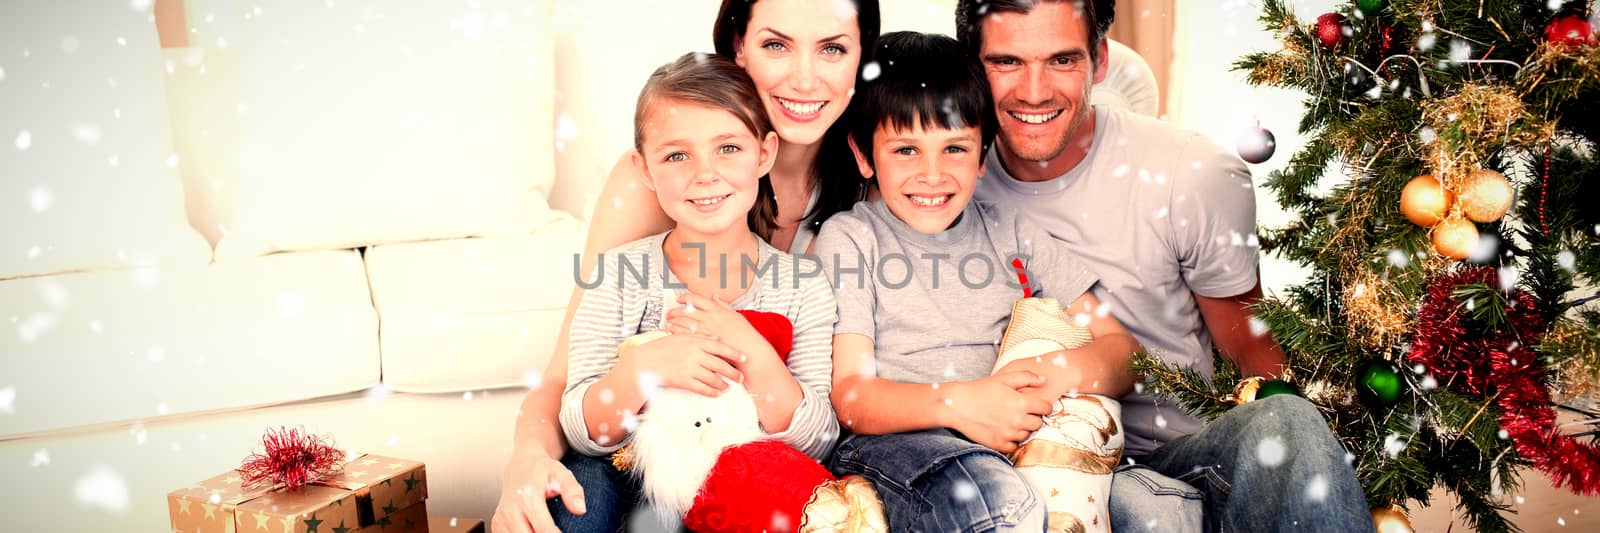 Happy family at Christmas time holding lots of presents against snow falling